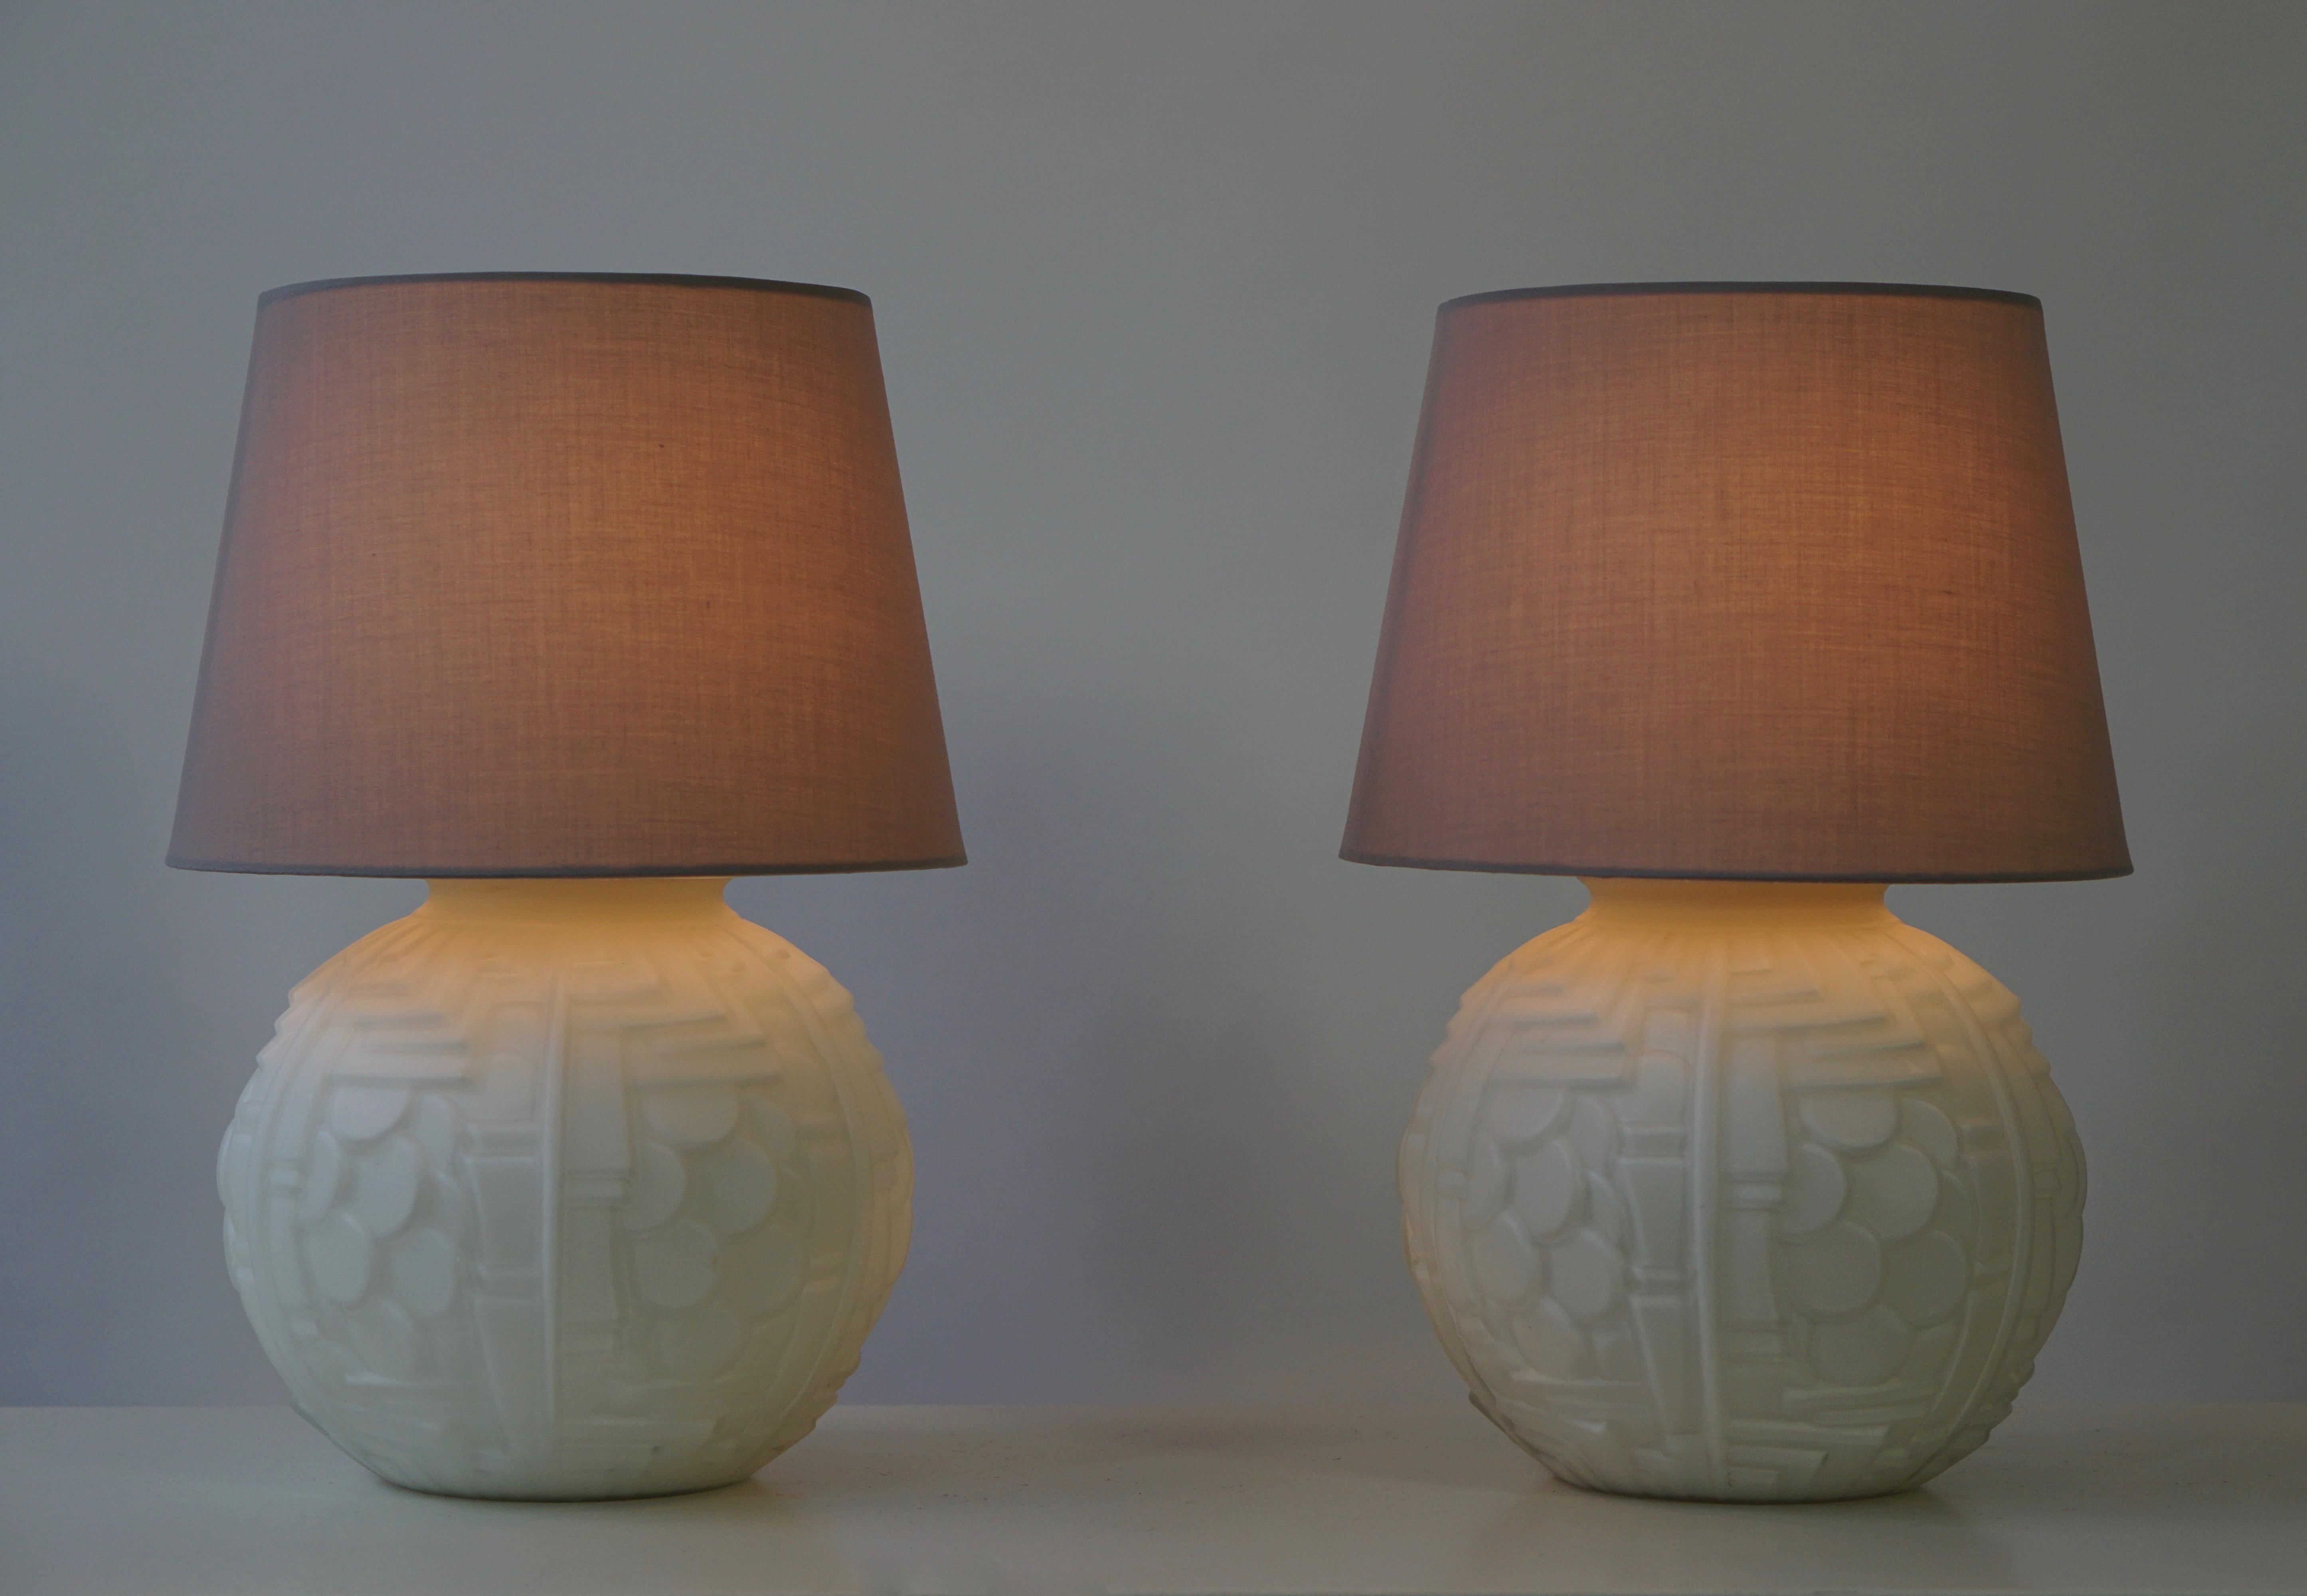 Two Italian glass table lamps.

Diameter base 20 cm.
Diameter shade 25 cm.
Height 36 cm.

Shades shown are for demonstration purposes only.